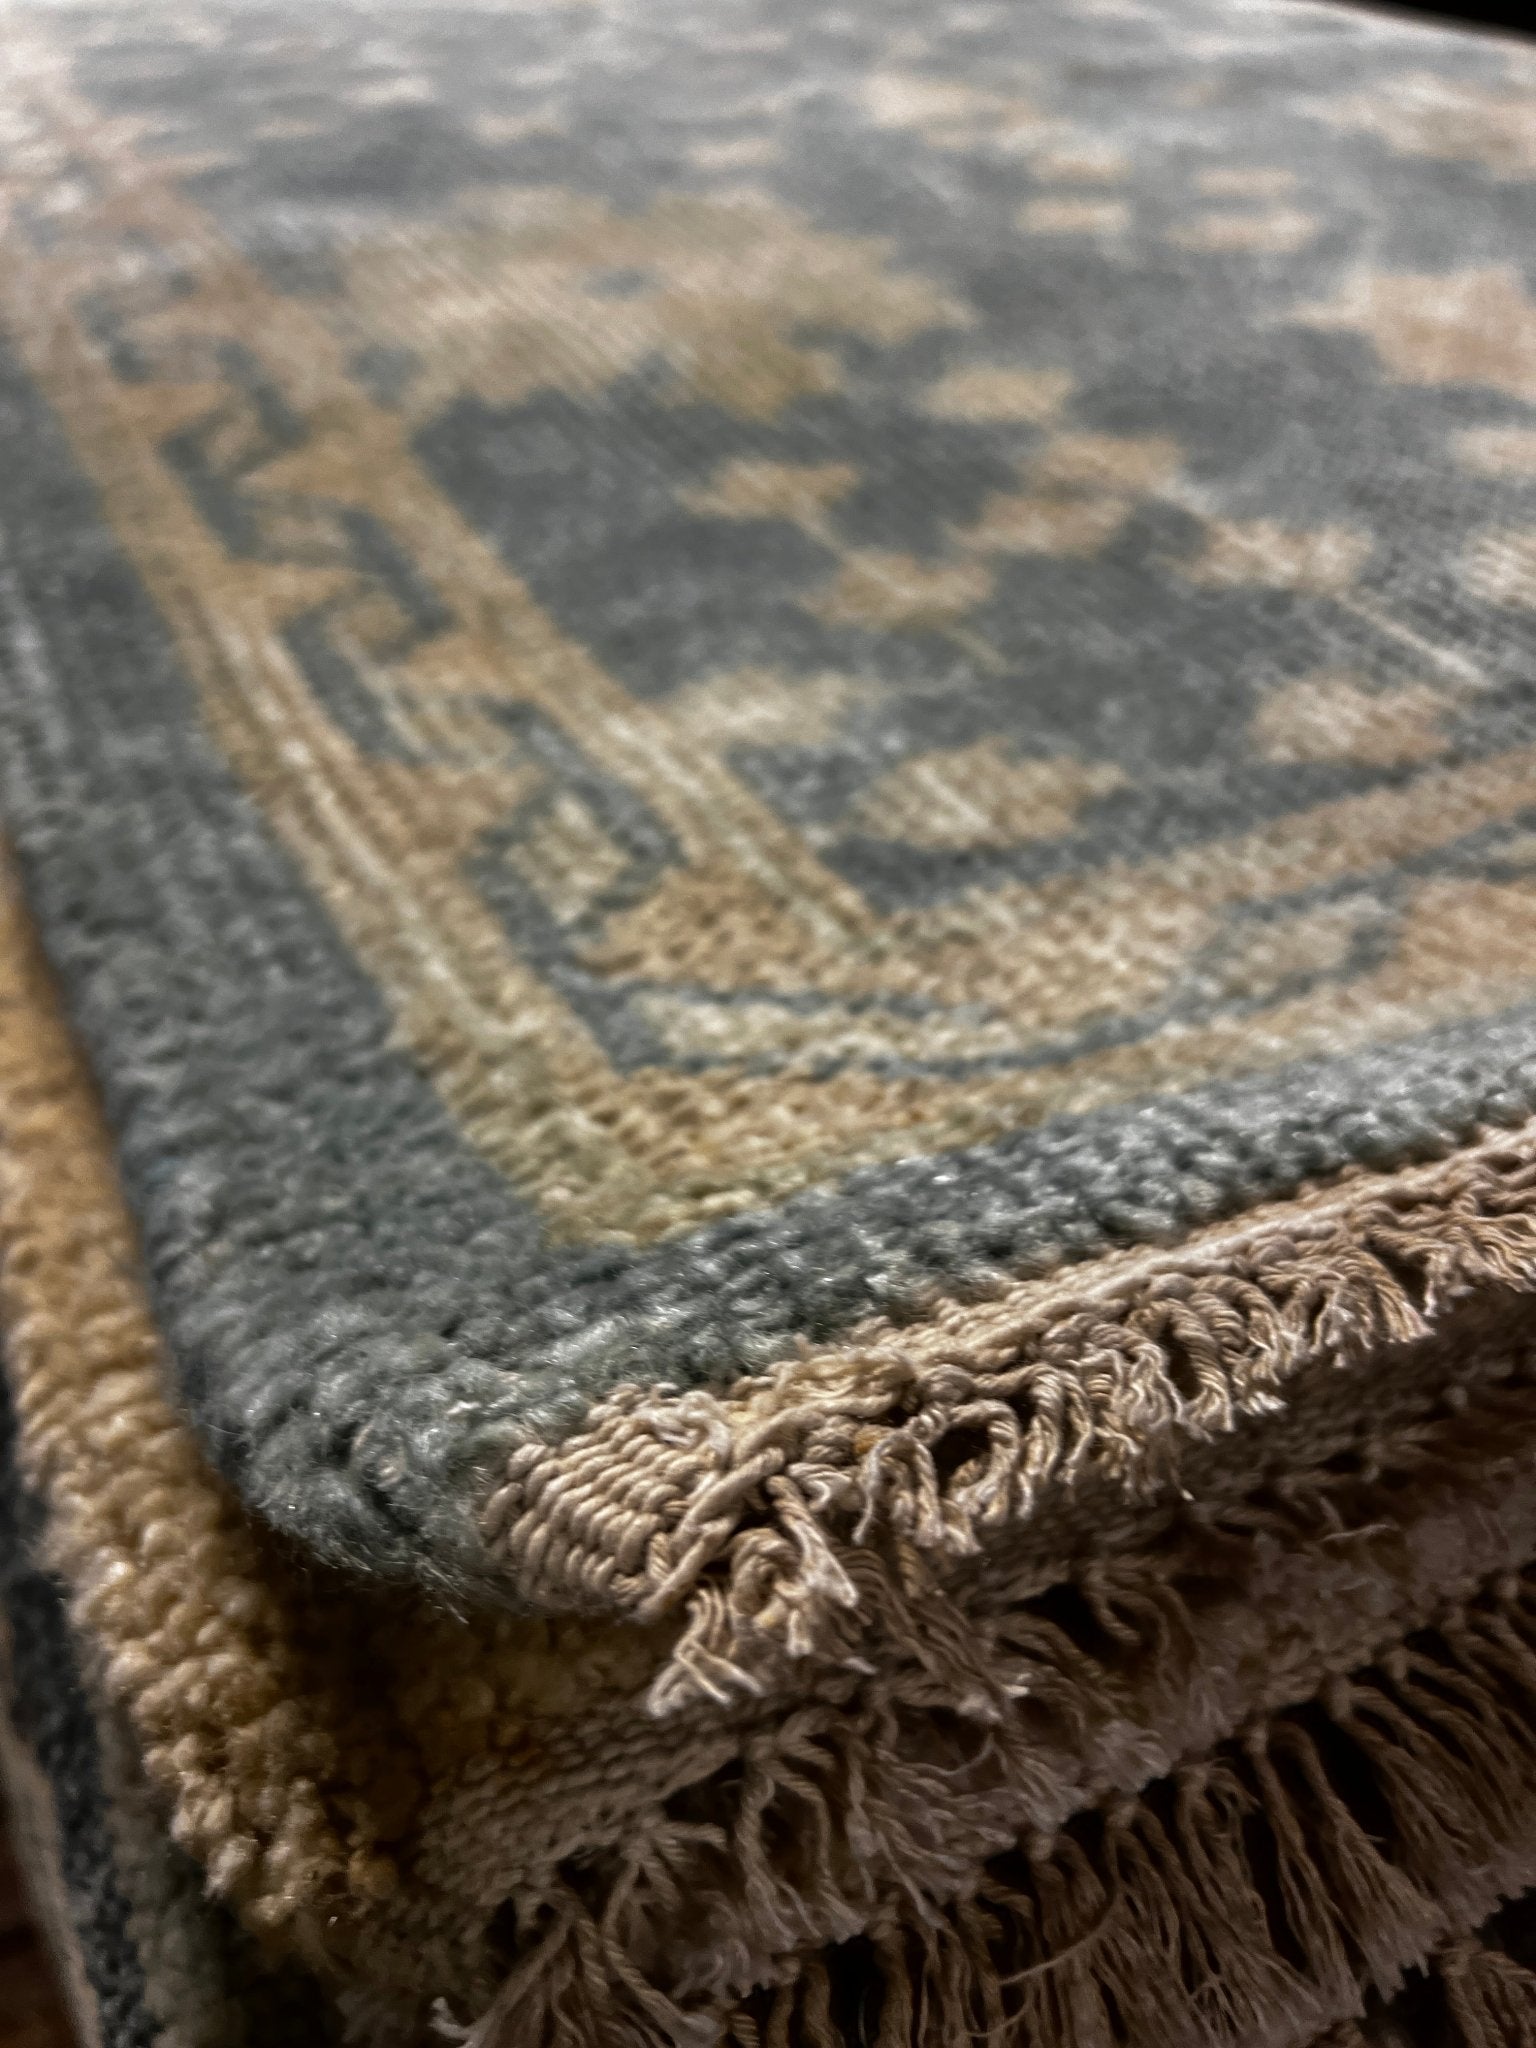 Amy Green 2.6x12 Hand-Knotted Blue & Gold Oushak Runner | Banana Manor Rug Factory Outlet